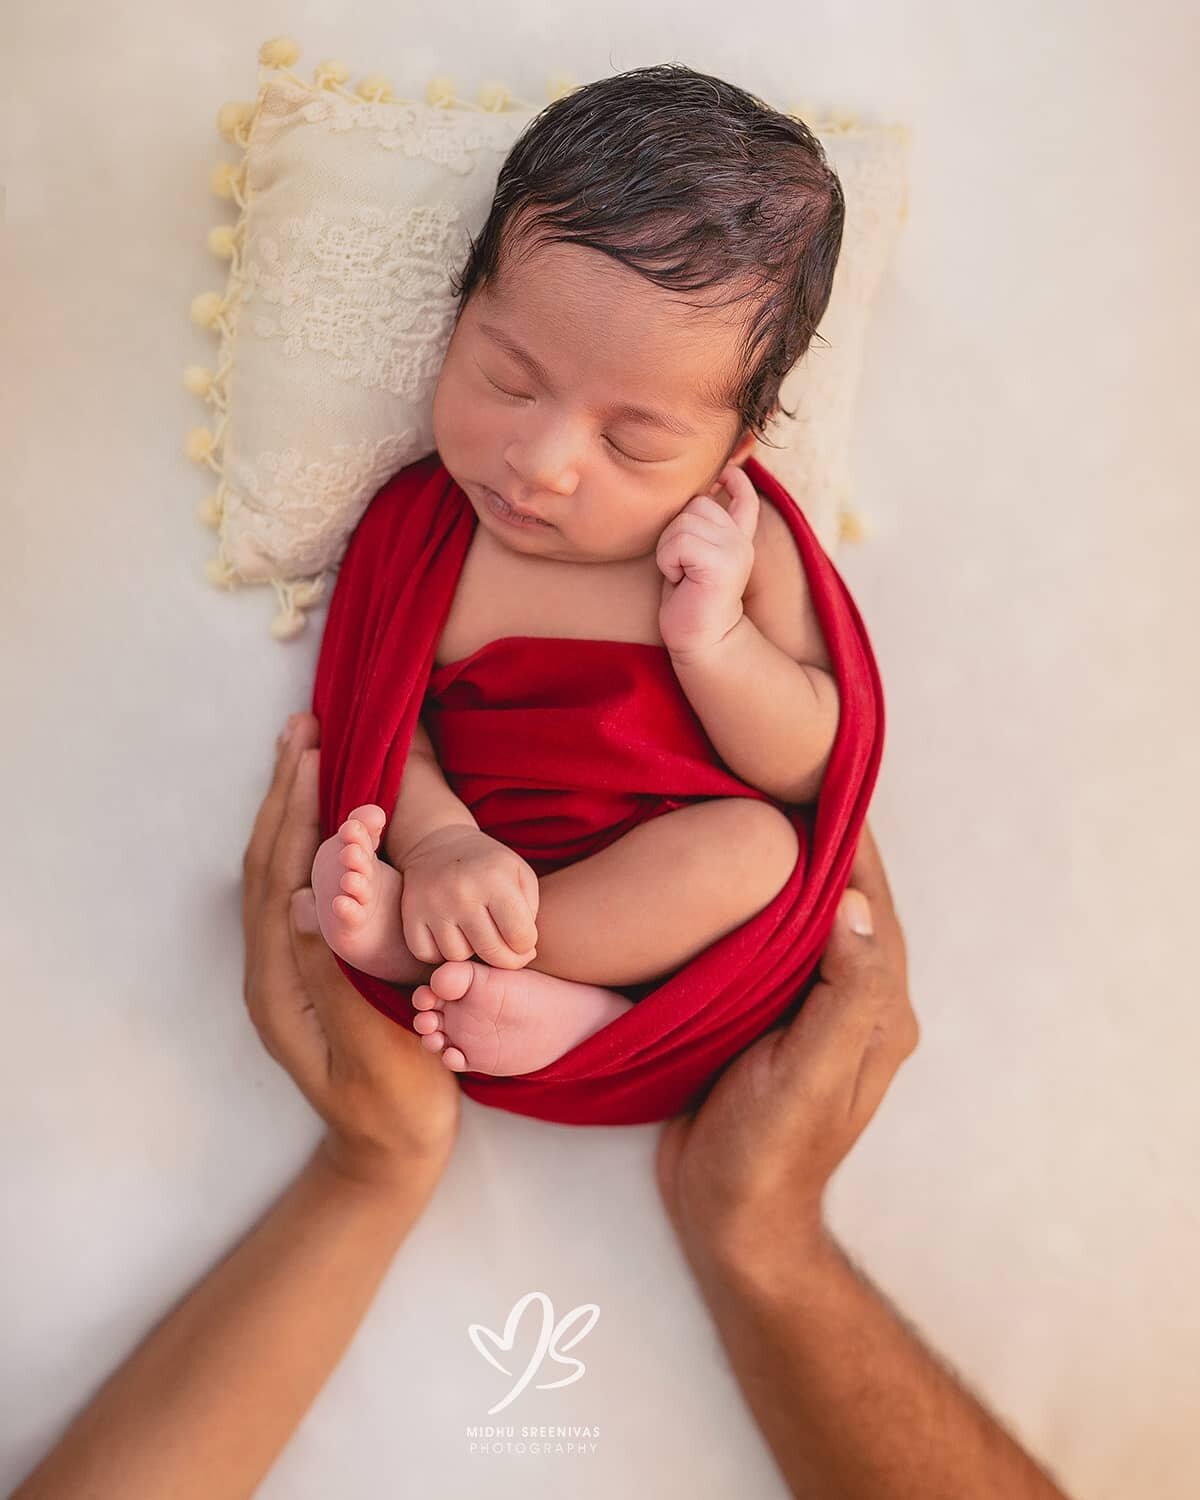 Counting my blessings each time I do a shoot. Babies are the most adorable things and I get to meet new babies all the time! 

------------------------------------------------

**Note to all new and to-be-parents**

The best time to photograph newbor